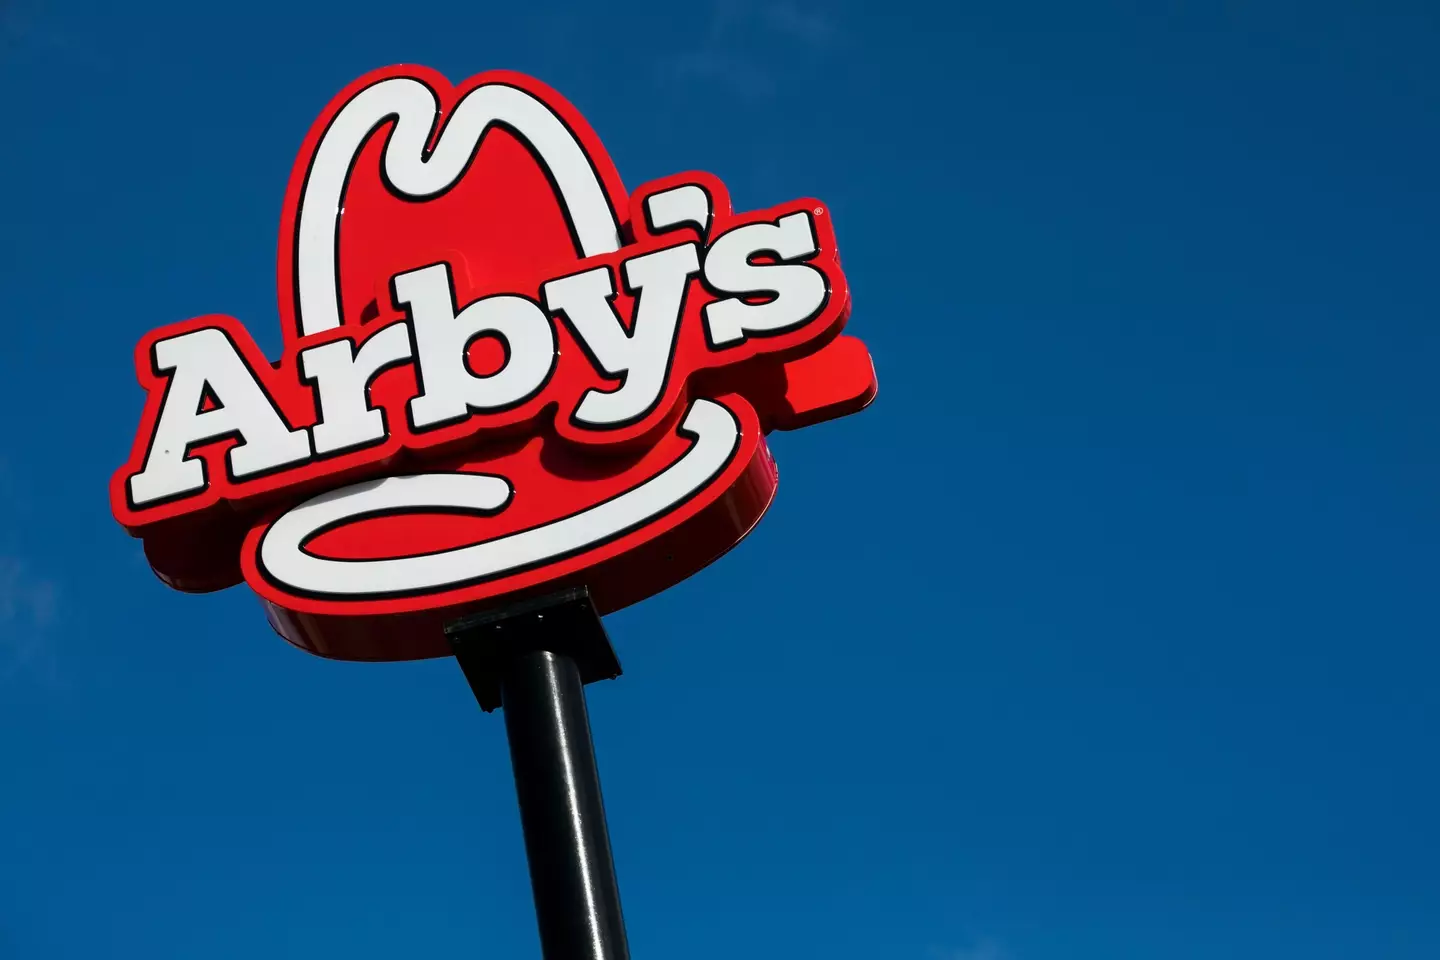 The employee worked as an Arby's night manager in Vancouver.